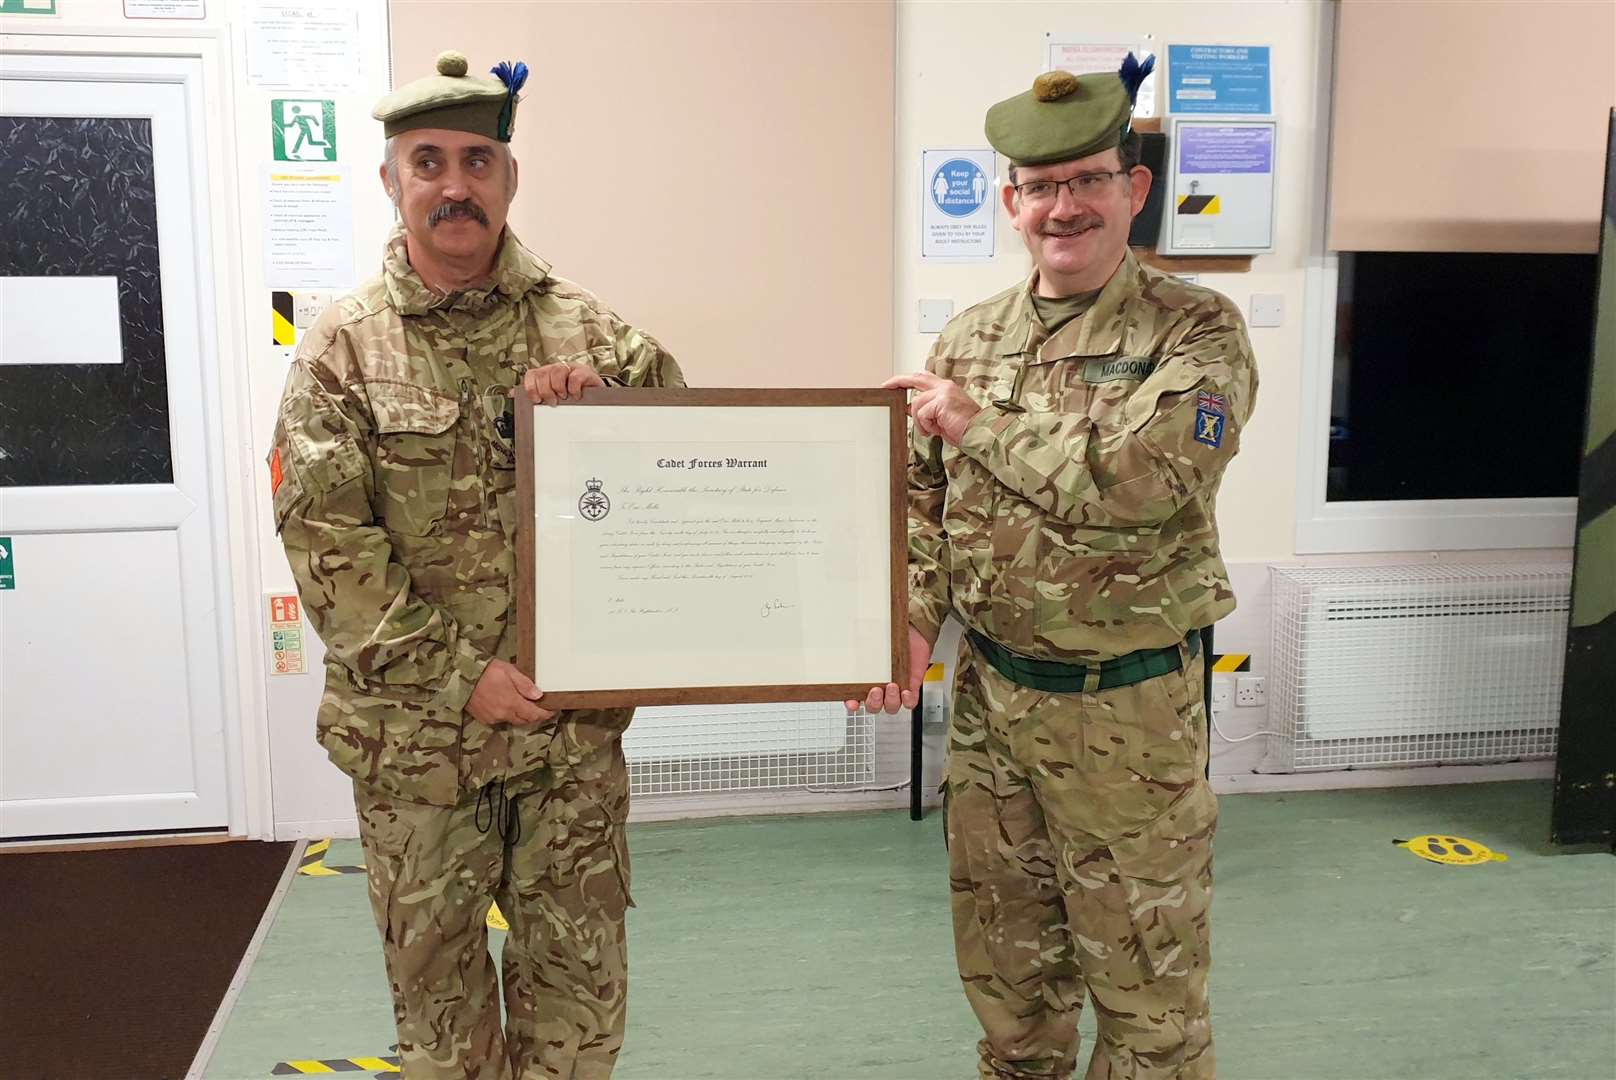 SMI Mills being presented with the Cadet Force warrant by the Battalion's Commandant Col McDonald